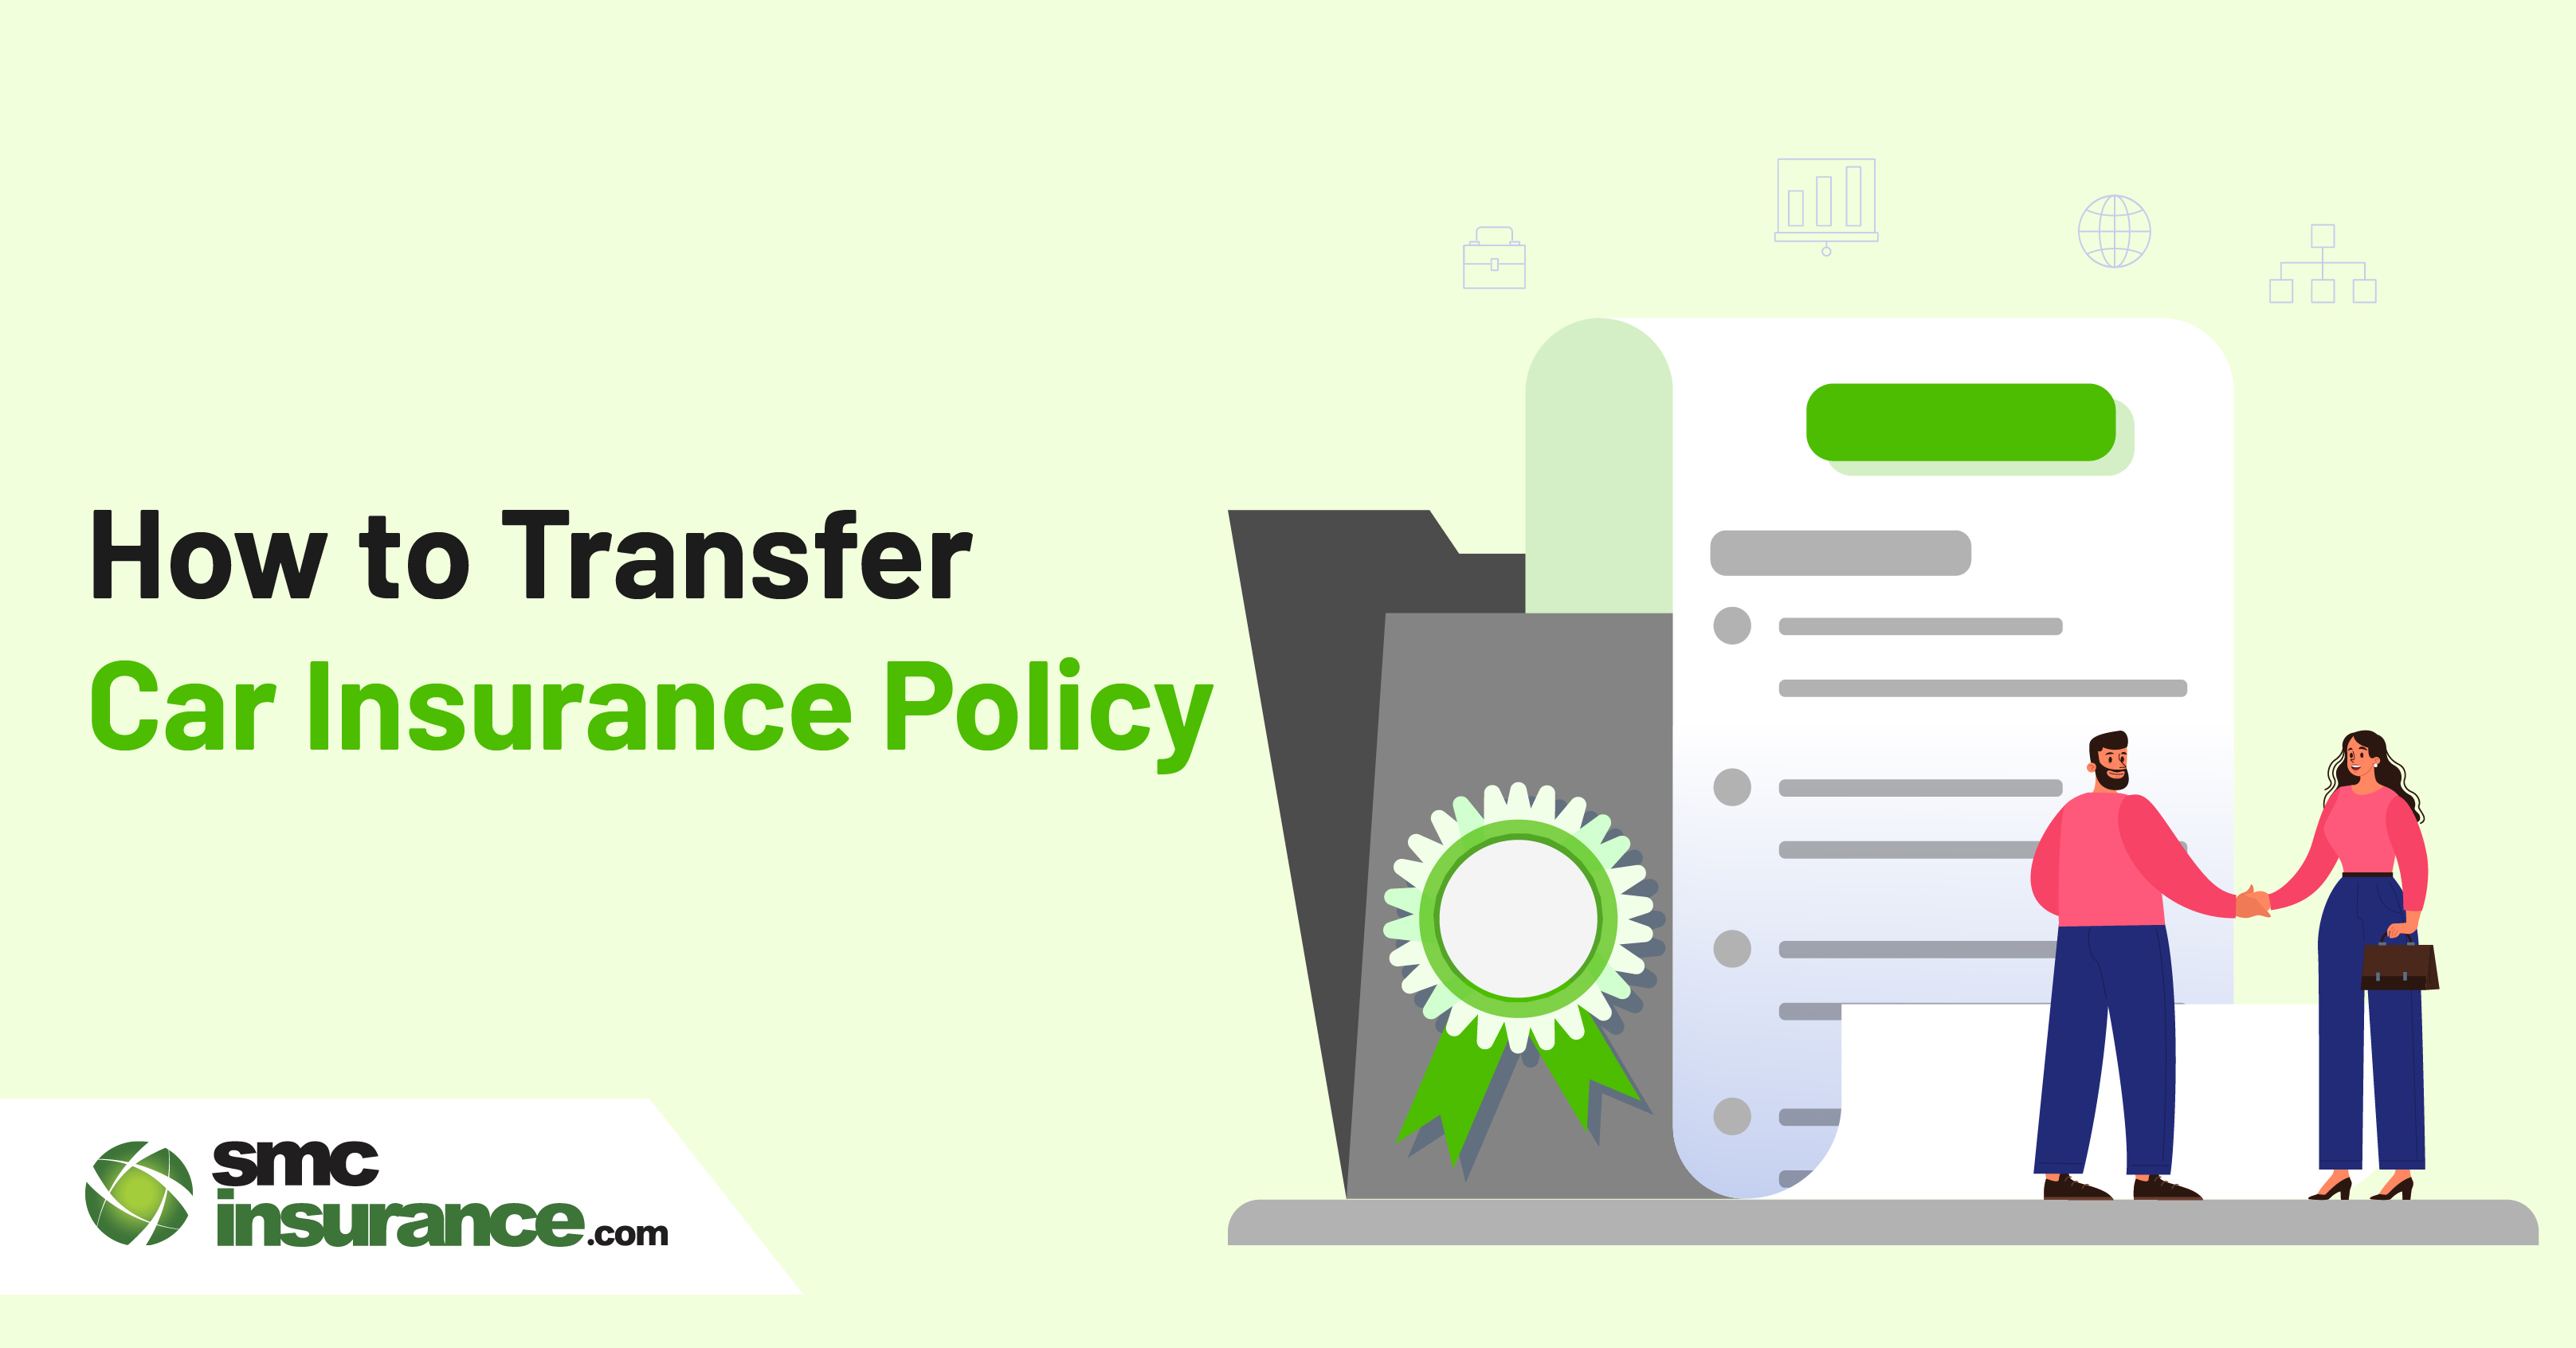 How to Transfer Car Insurance Policy?